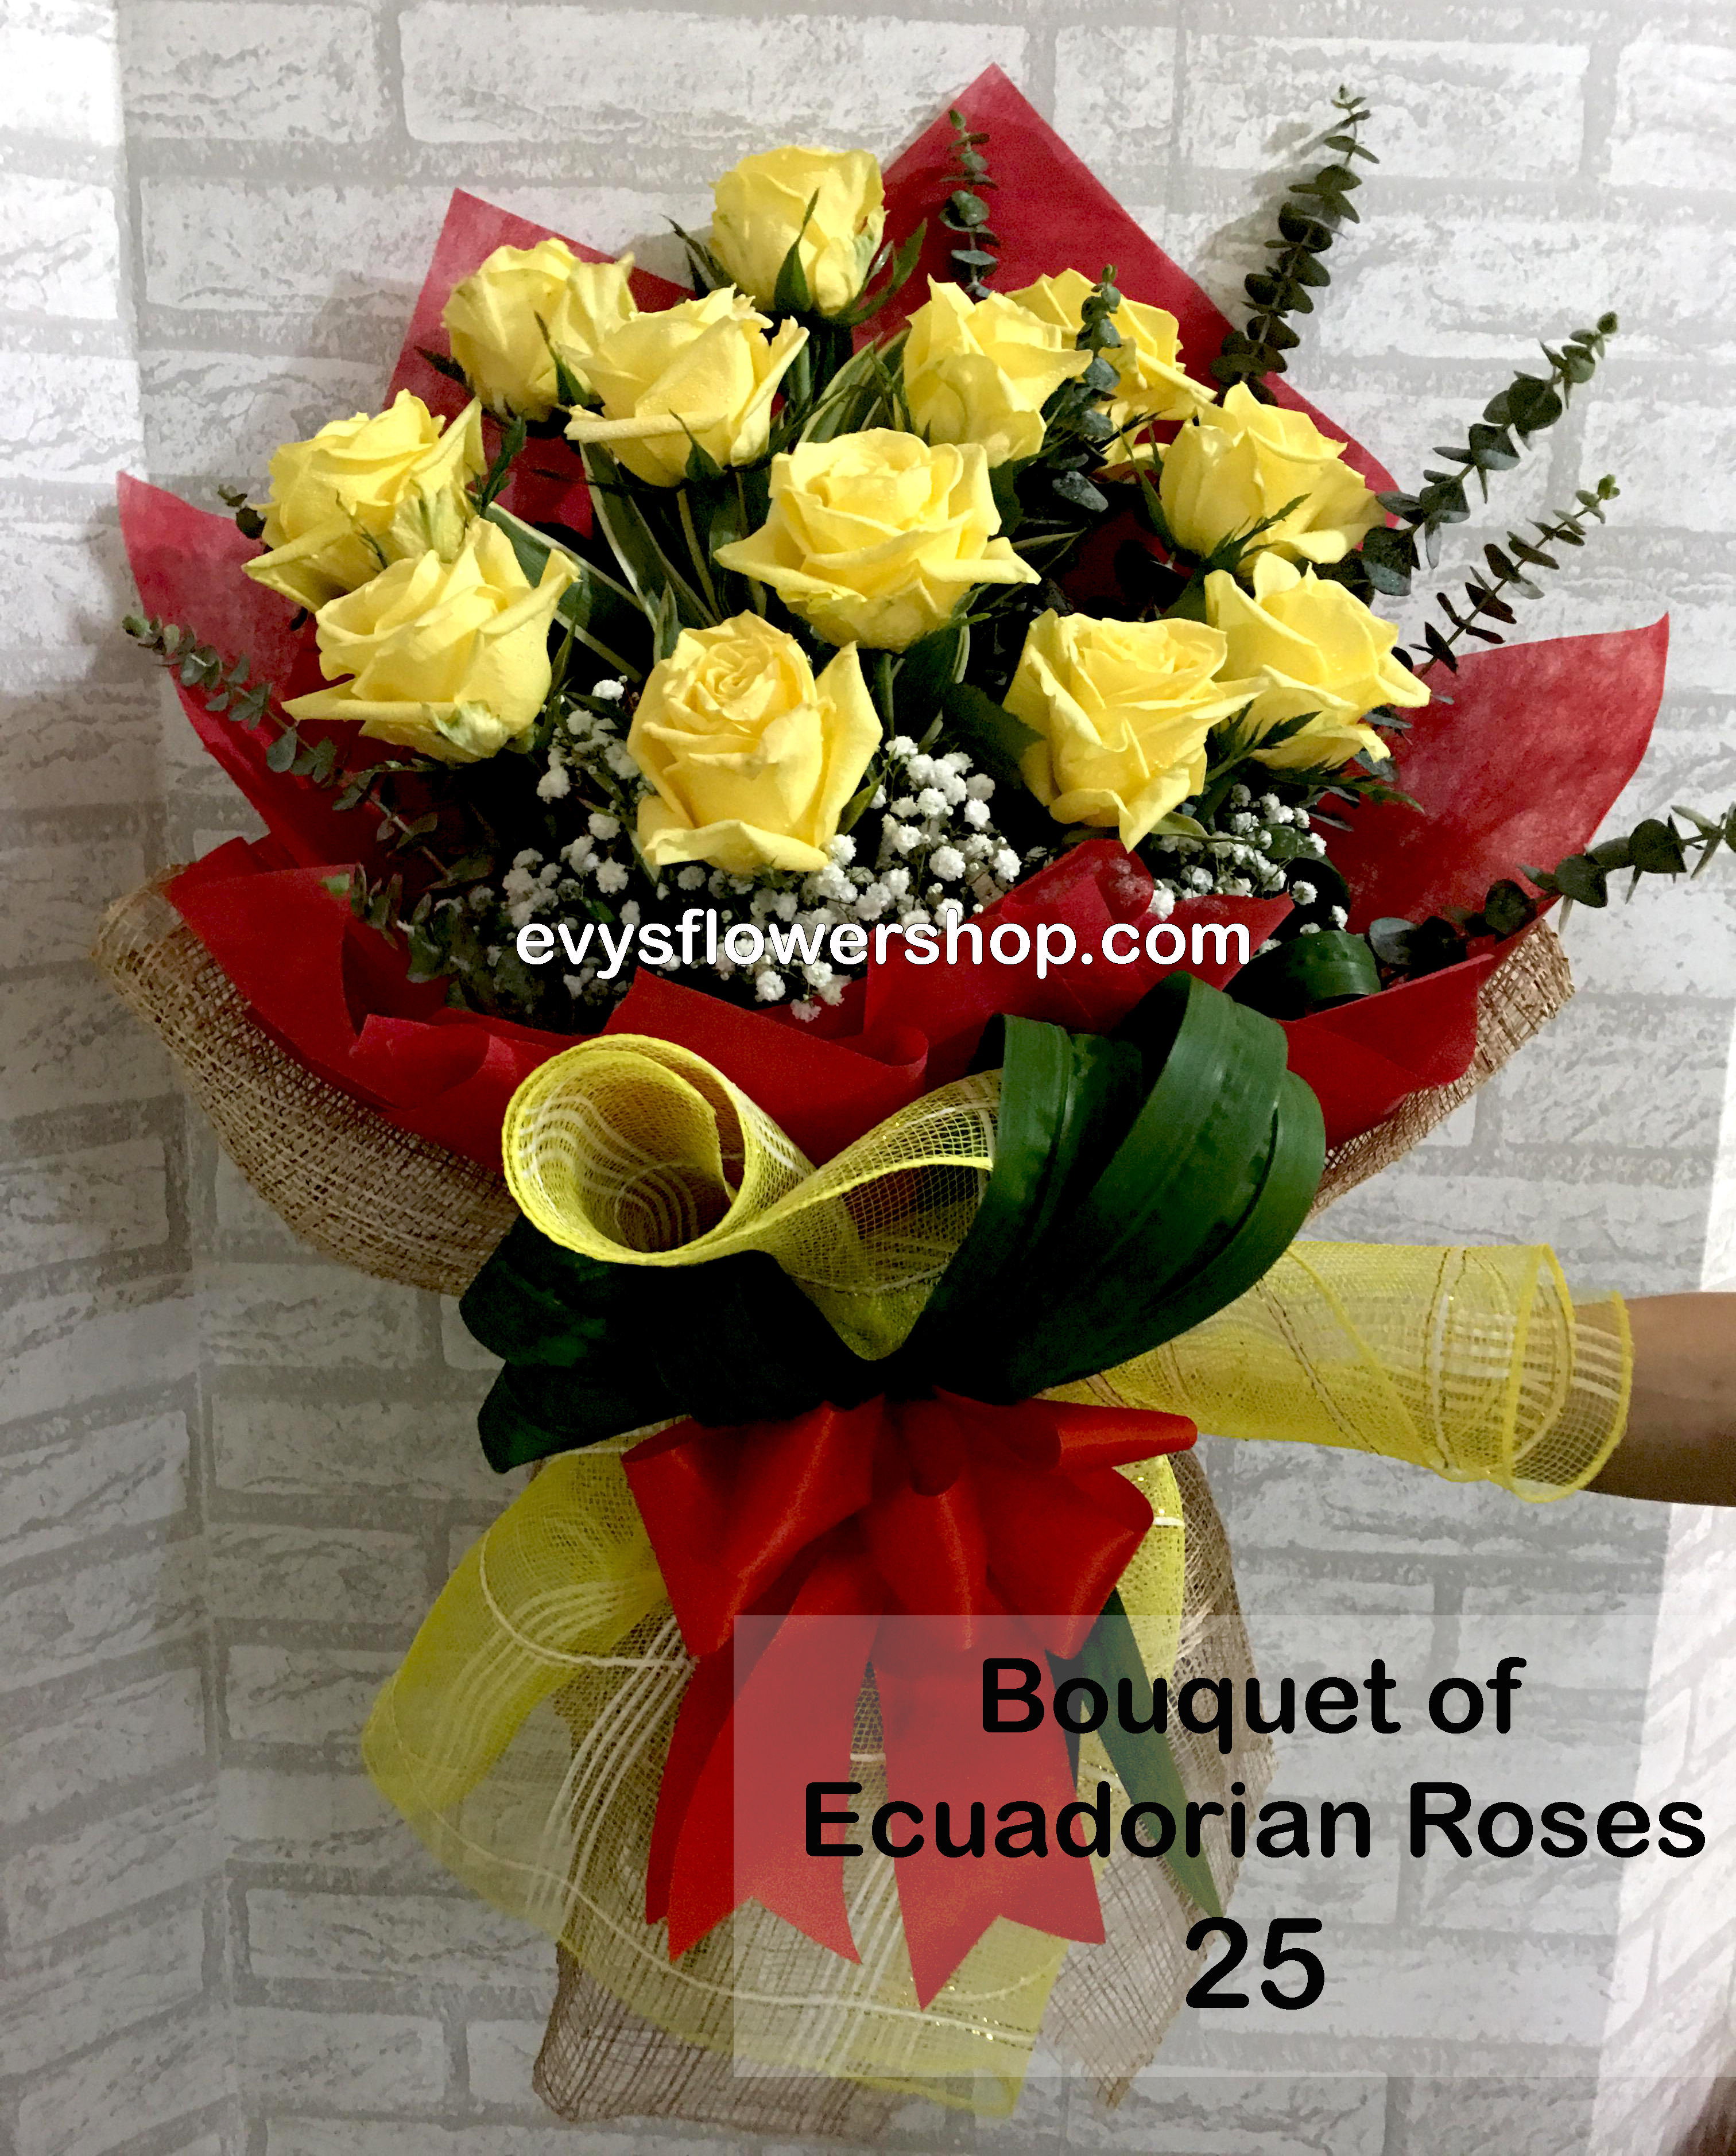 bouquet of ecuadorian roses 25, bouquet of ecuadorian roses, ecuadorian roses, bouquet, flower delivery, flower delivery philippines